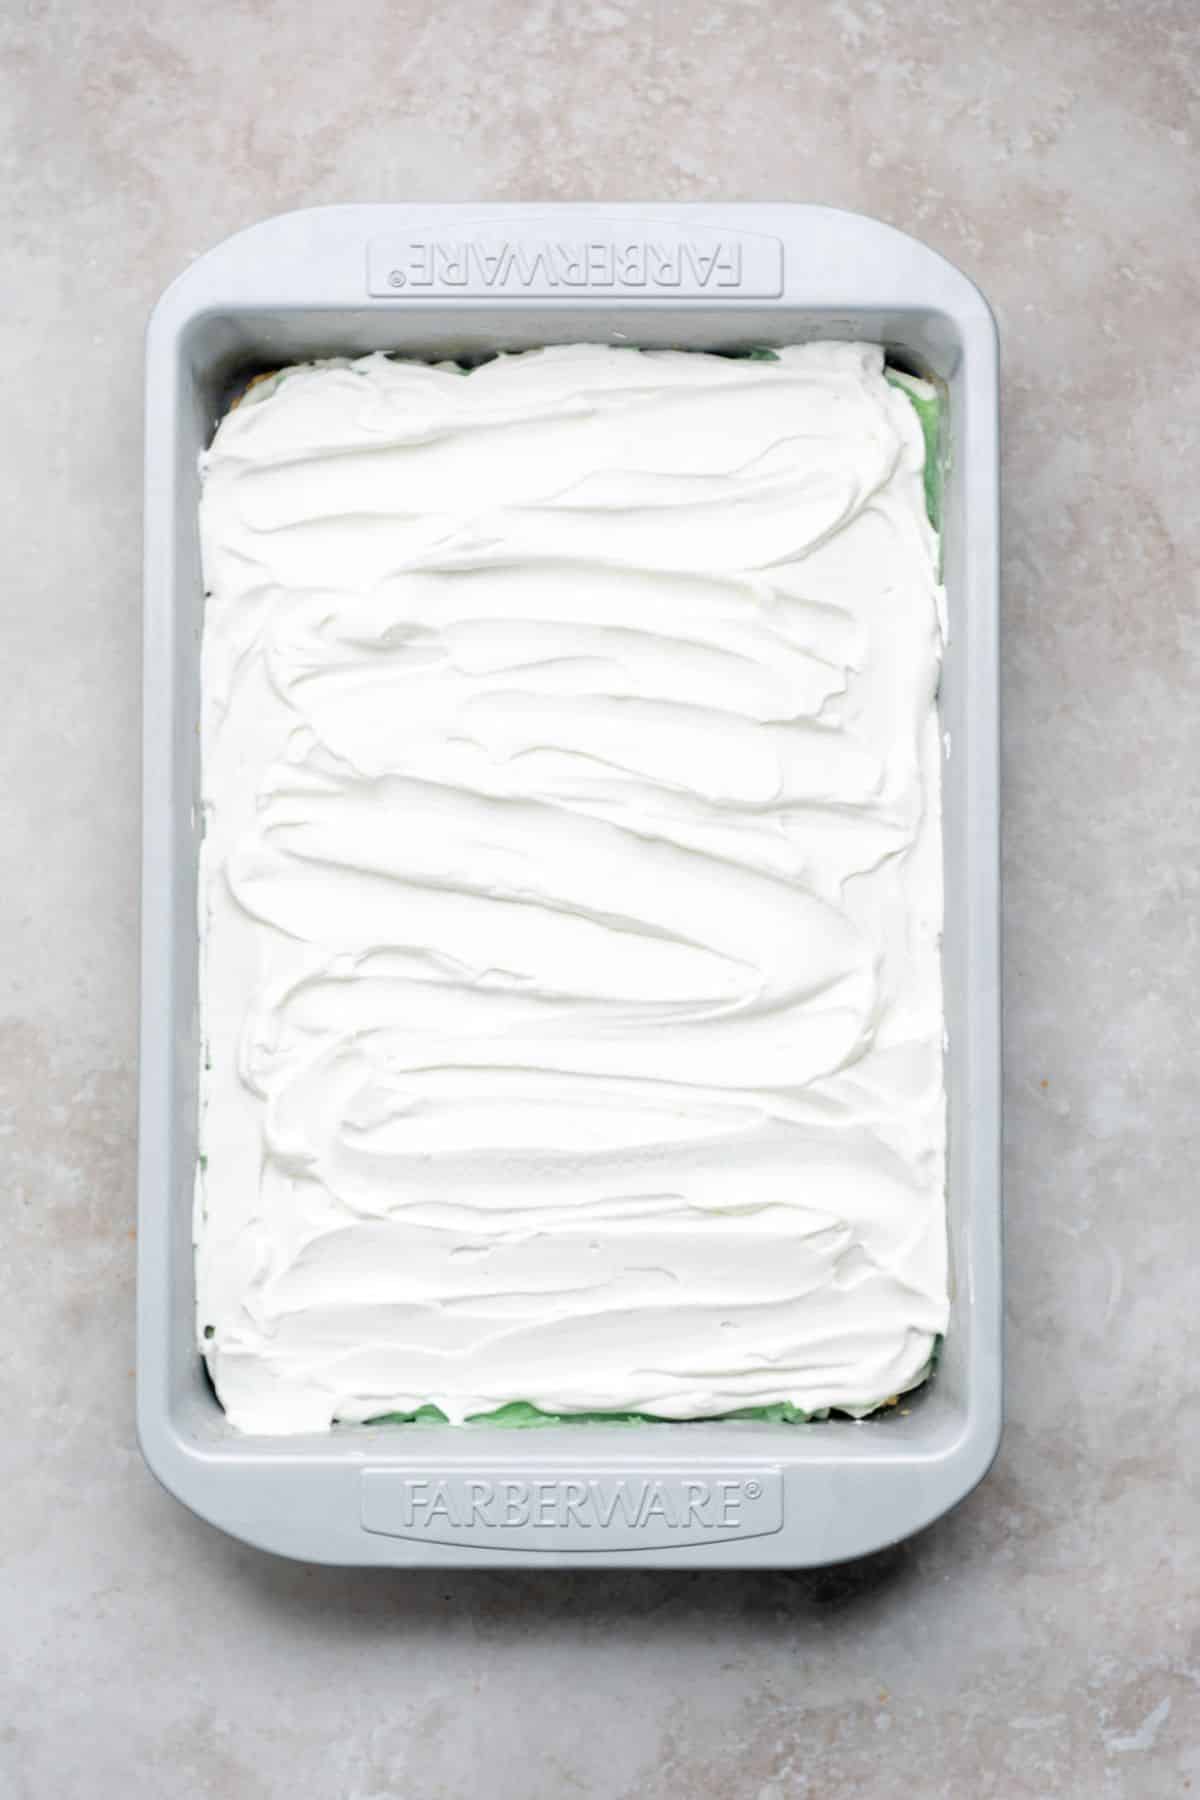 Whipped topping spread over pistachio dessert.